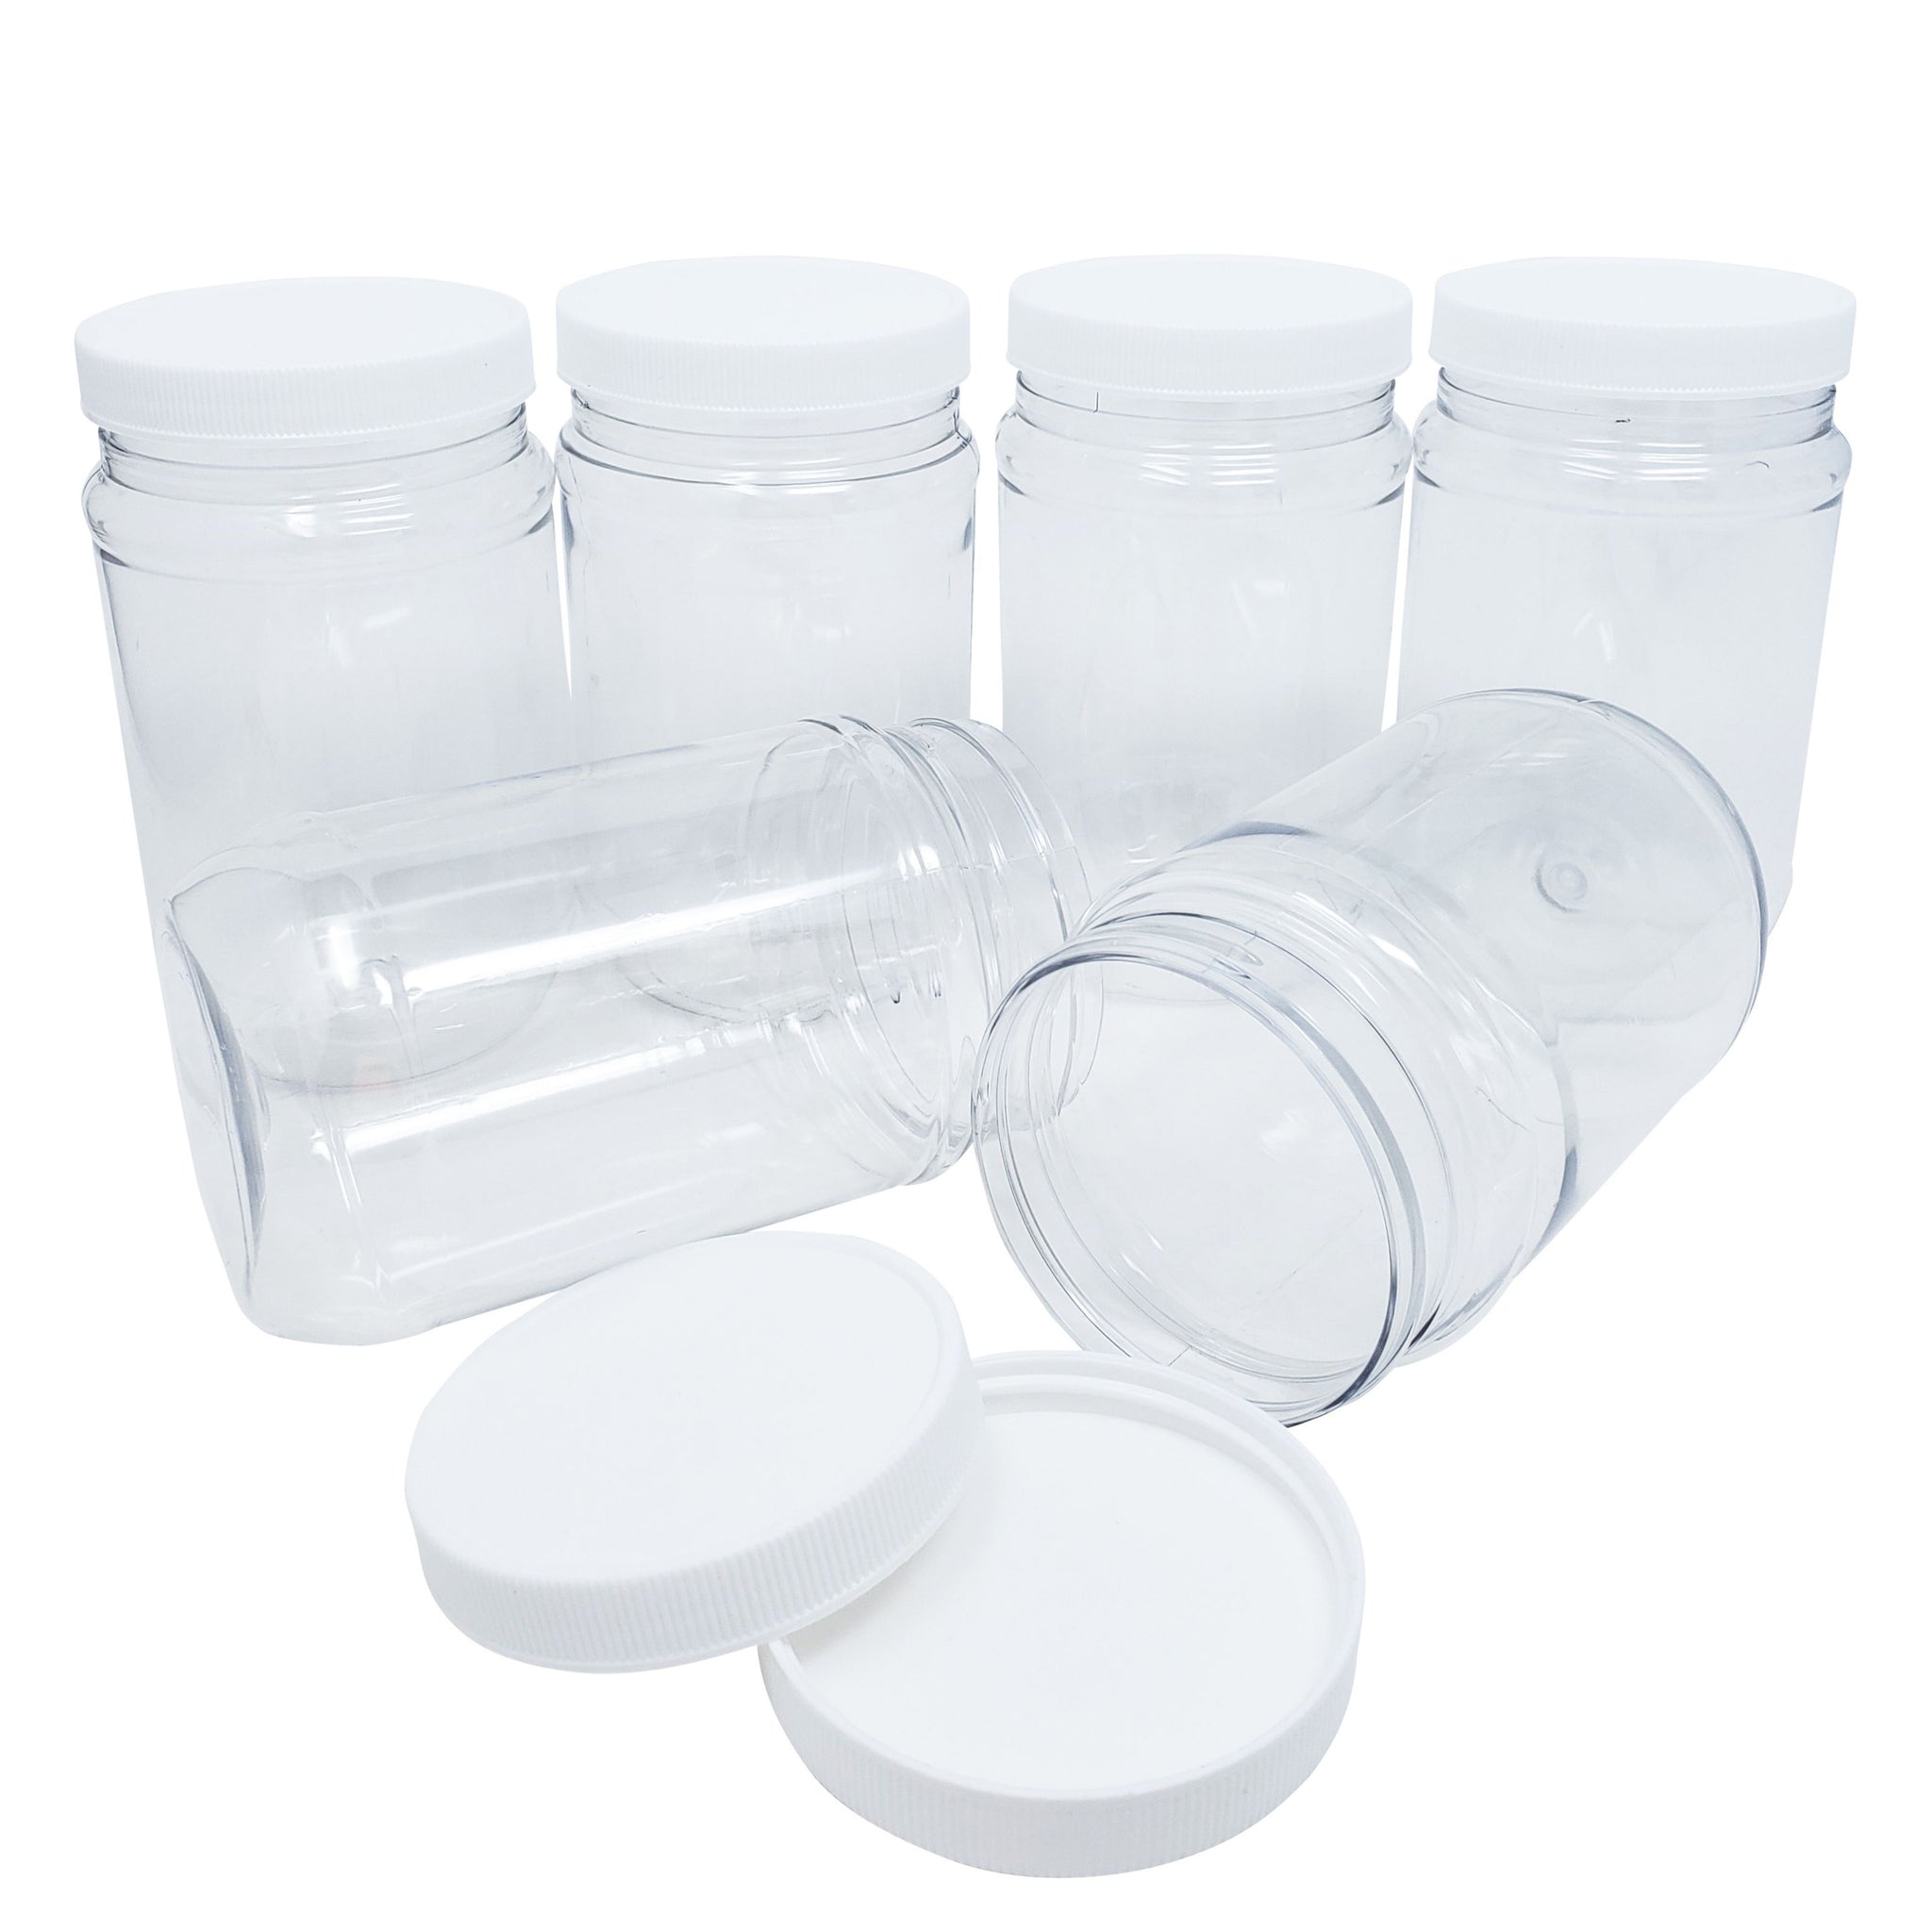 6 oz Clear Glass Jars w/ Lined White Plastic Ribbed Caps